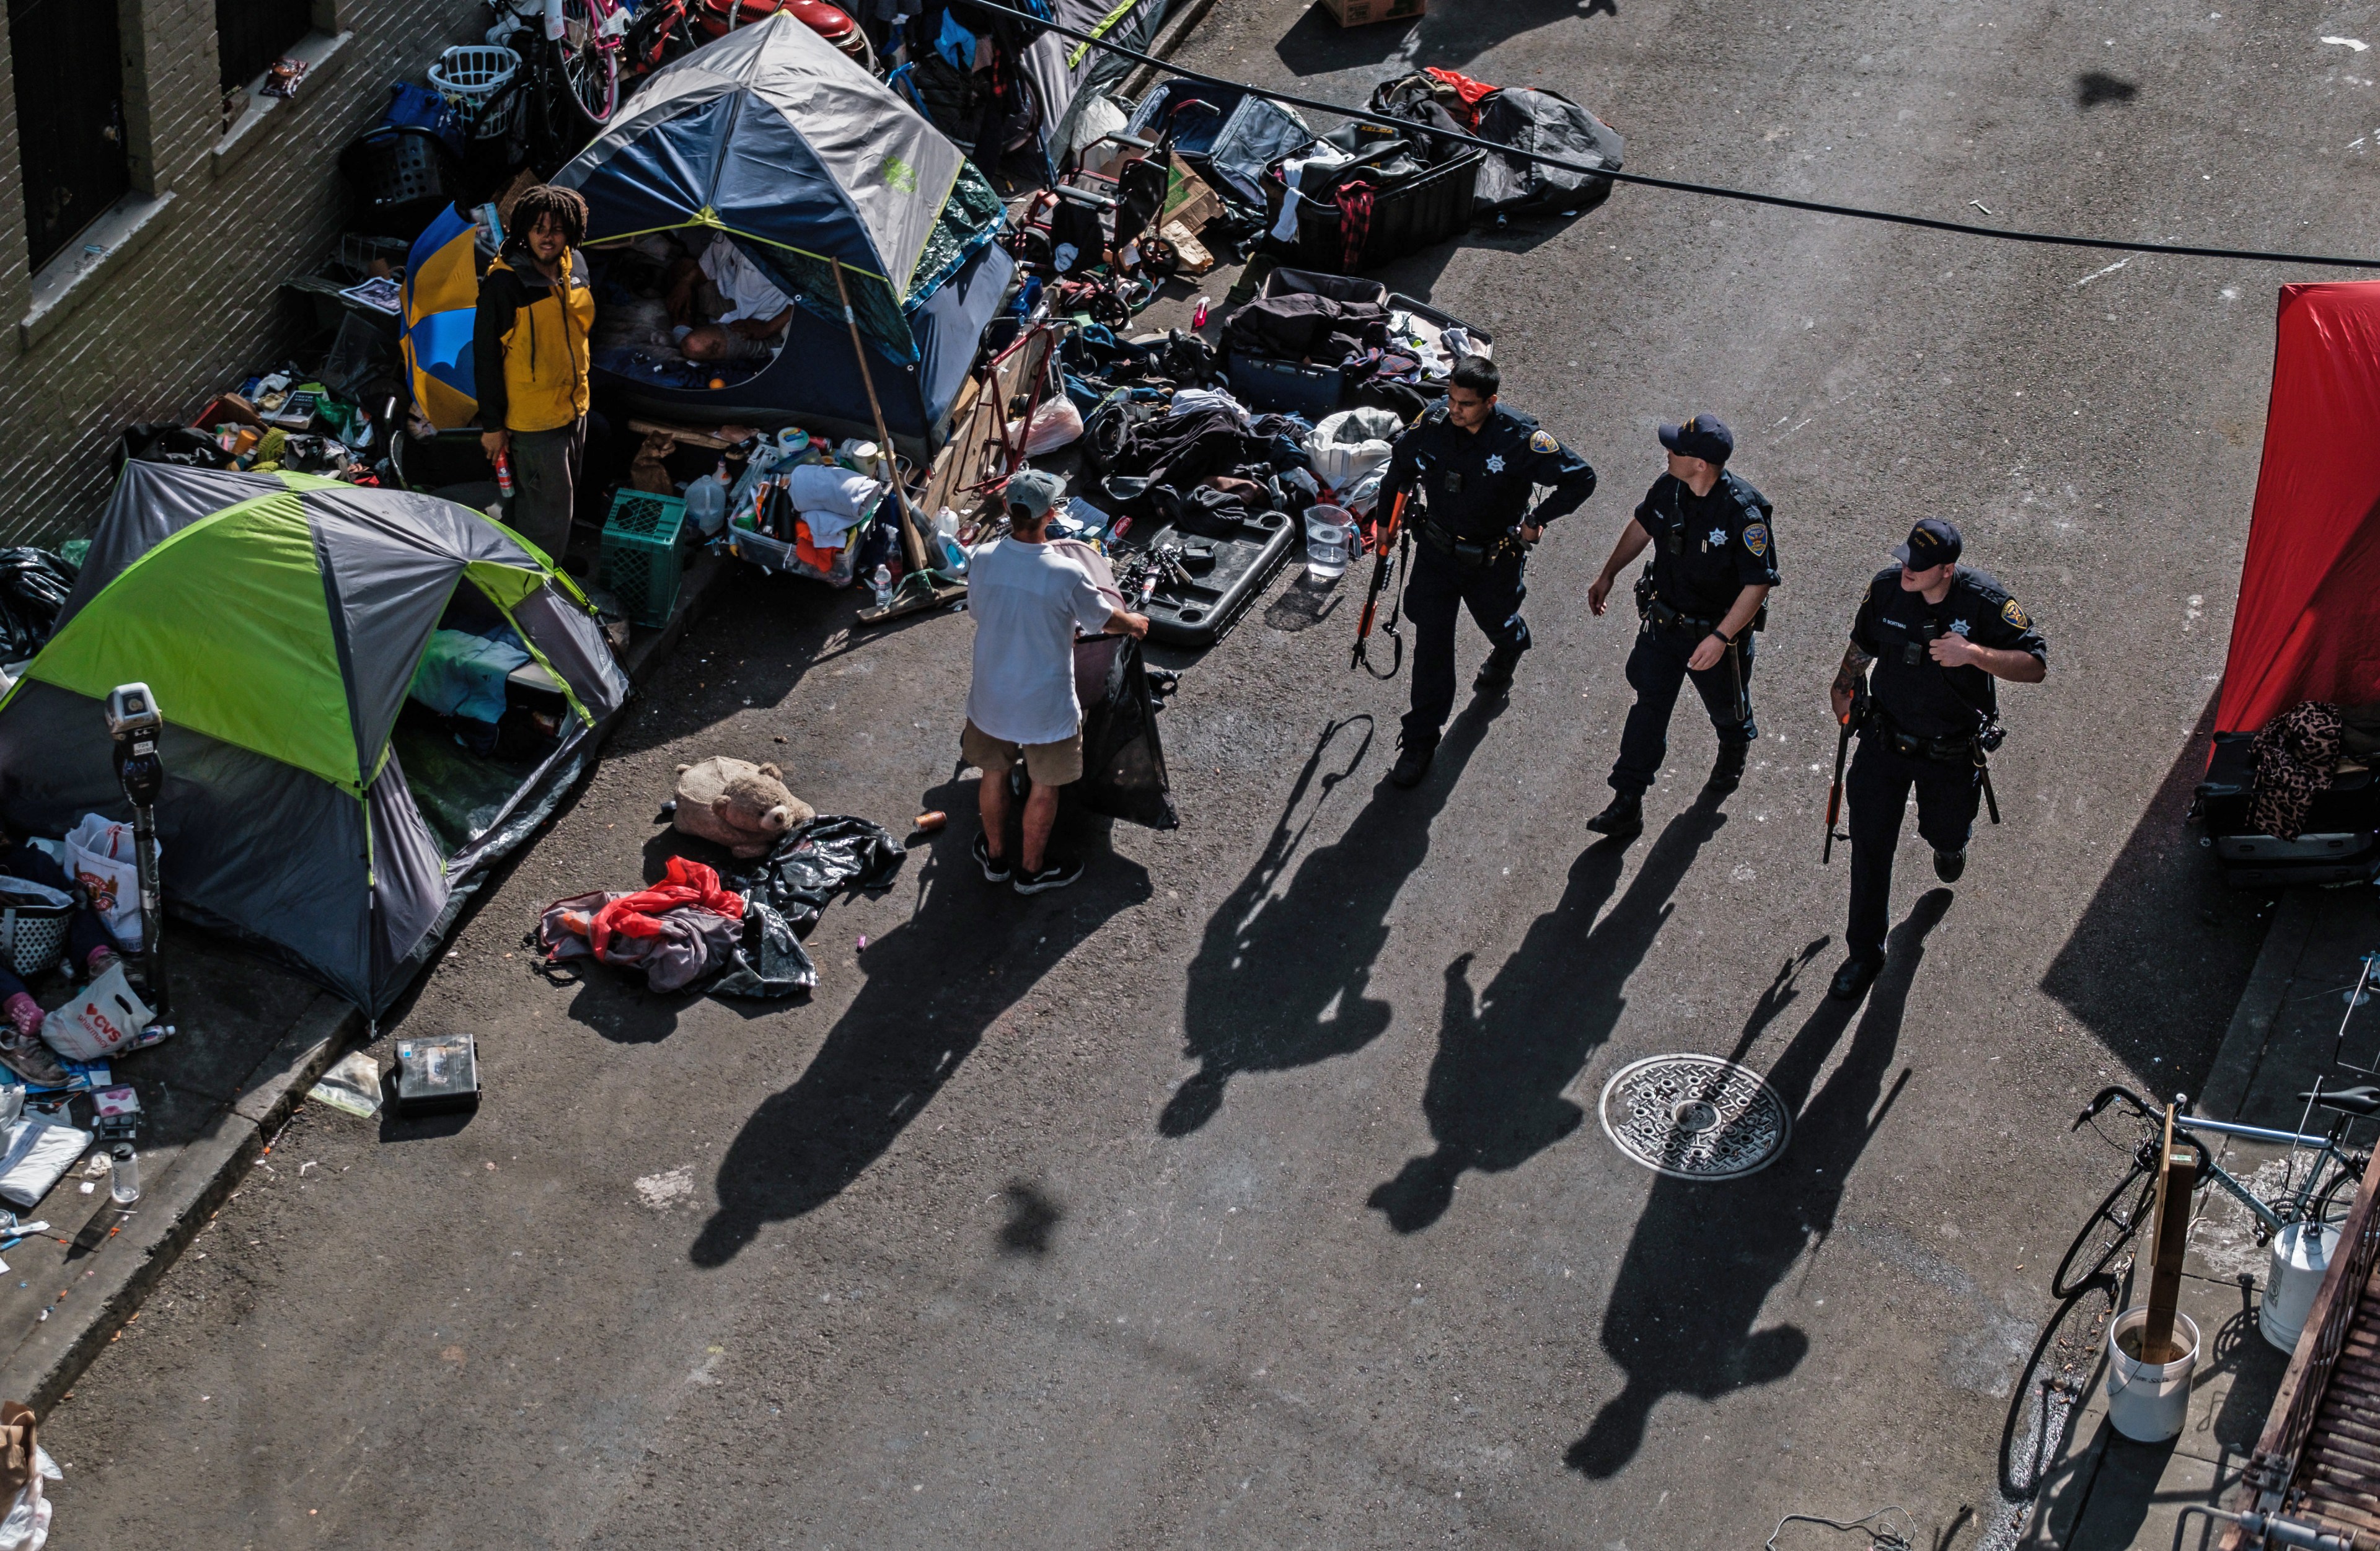 Police officers are seen from above walking past tents.